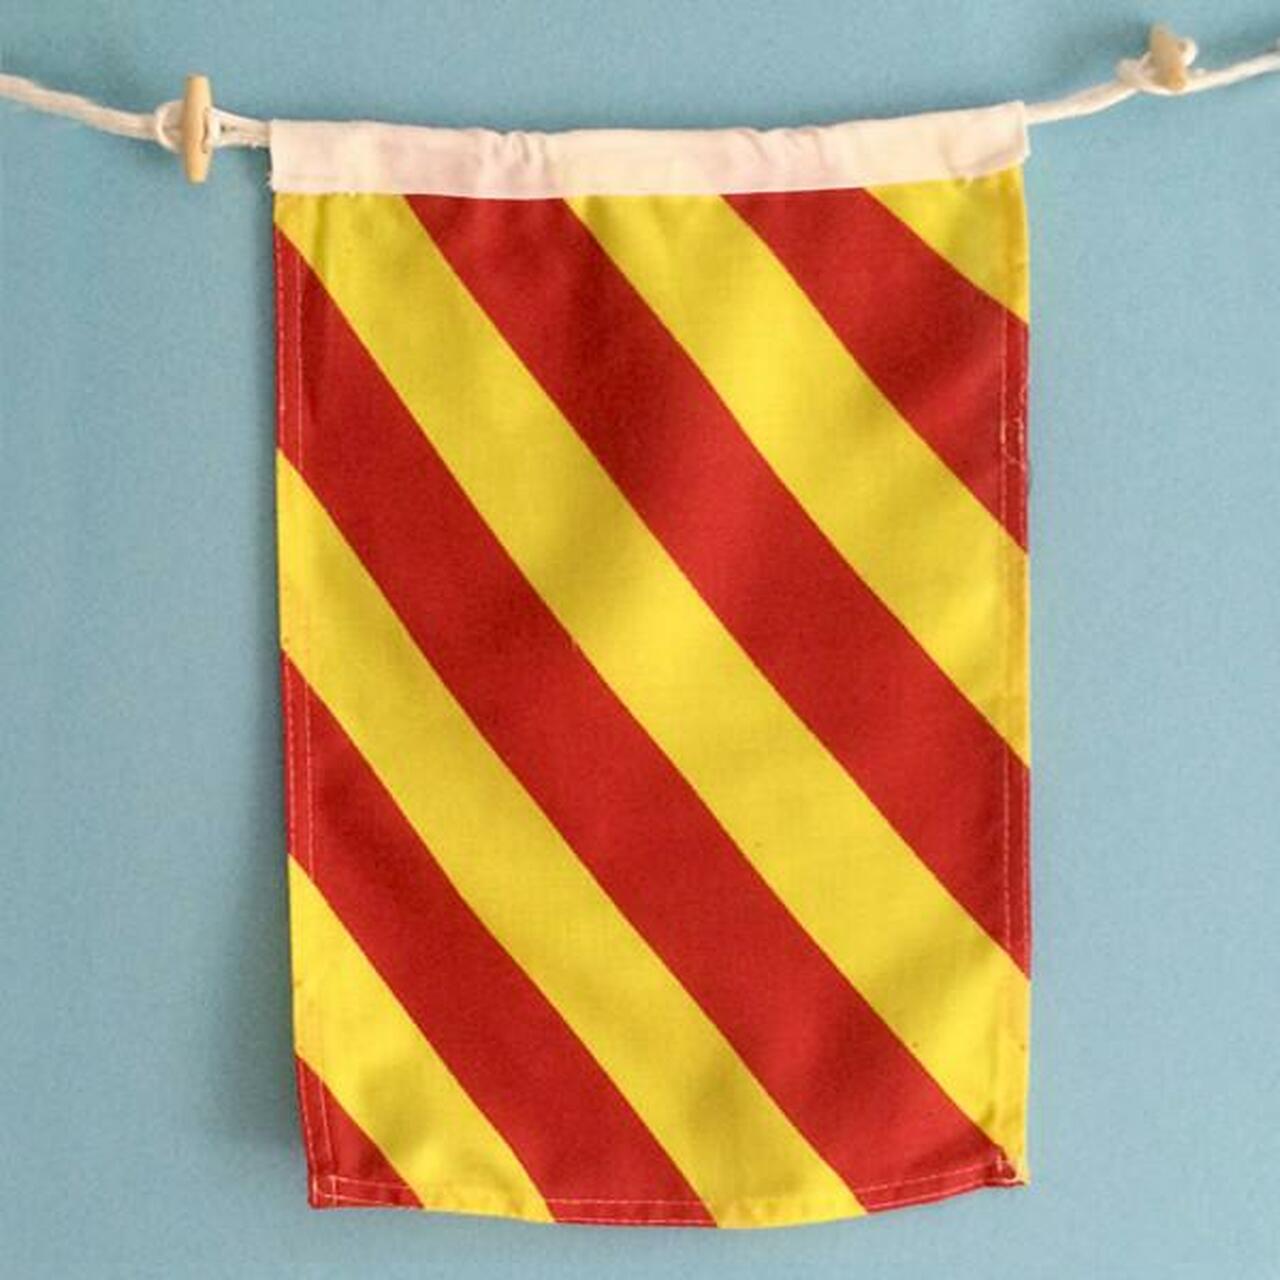 Nautical Flags, A-Z, 0-9, Maritime Signal Flags Decor New England Trading Co Y  